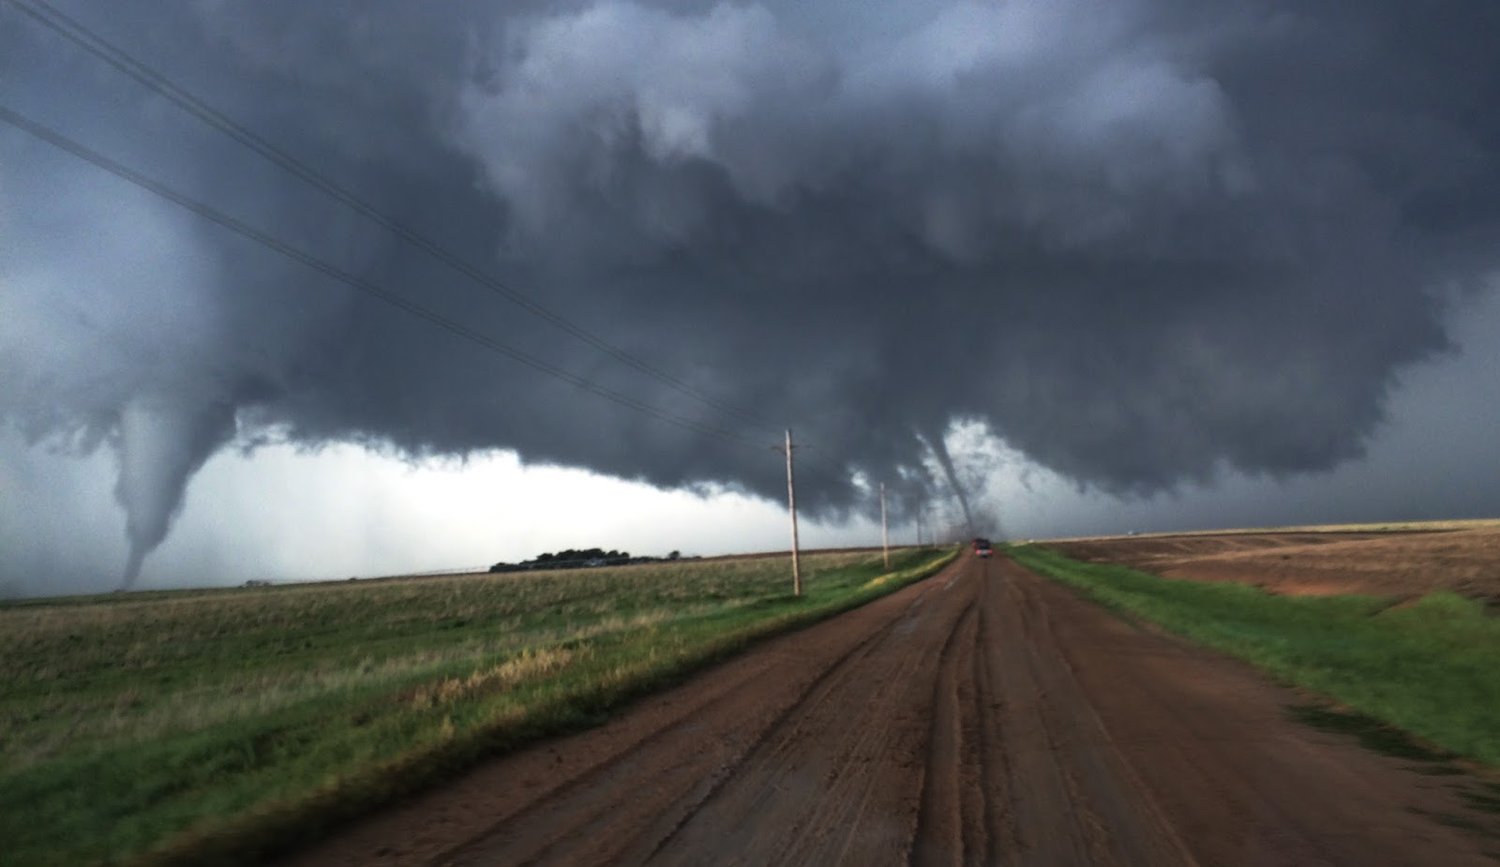 Twin Tornadoes on the Ground - The 3rd would come from the Wall Cloud furthest right.